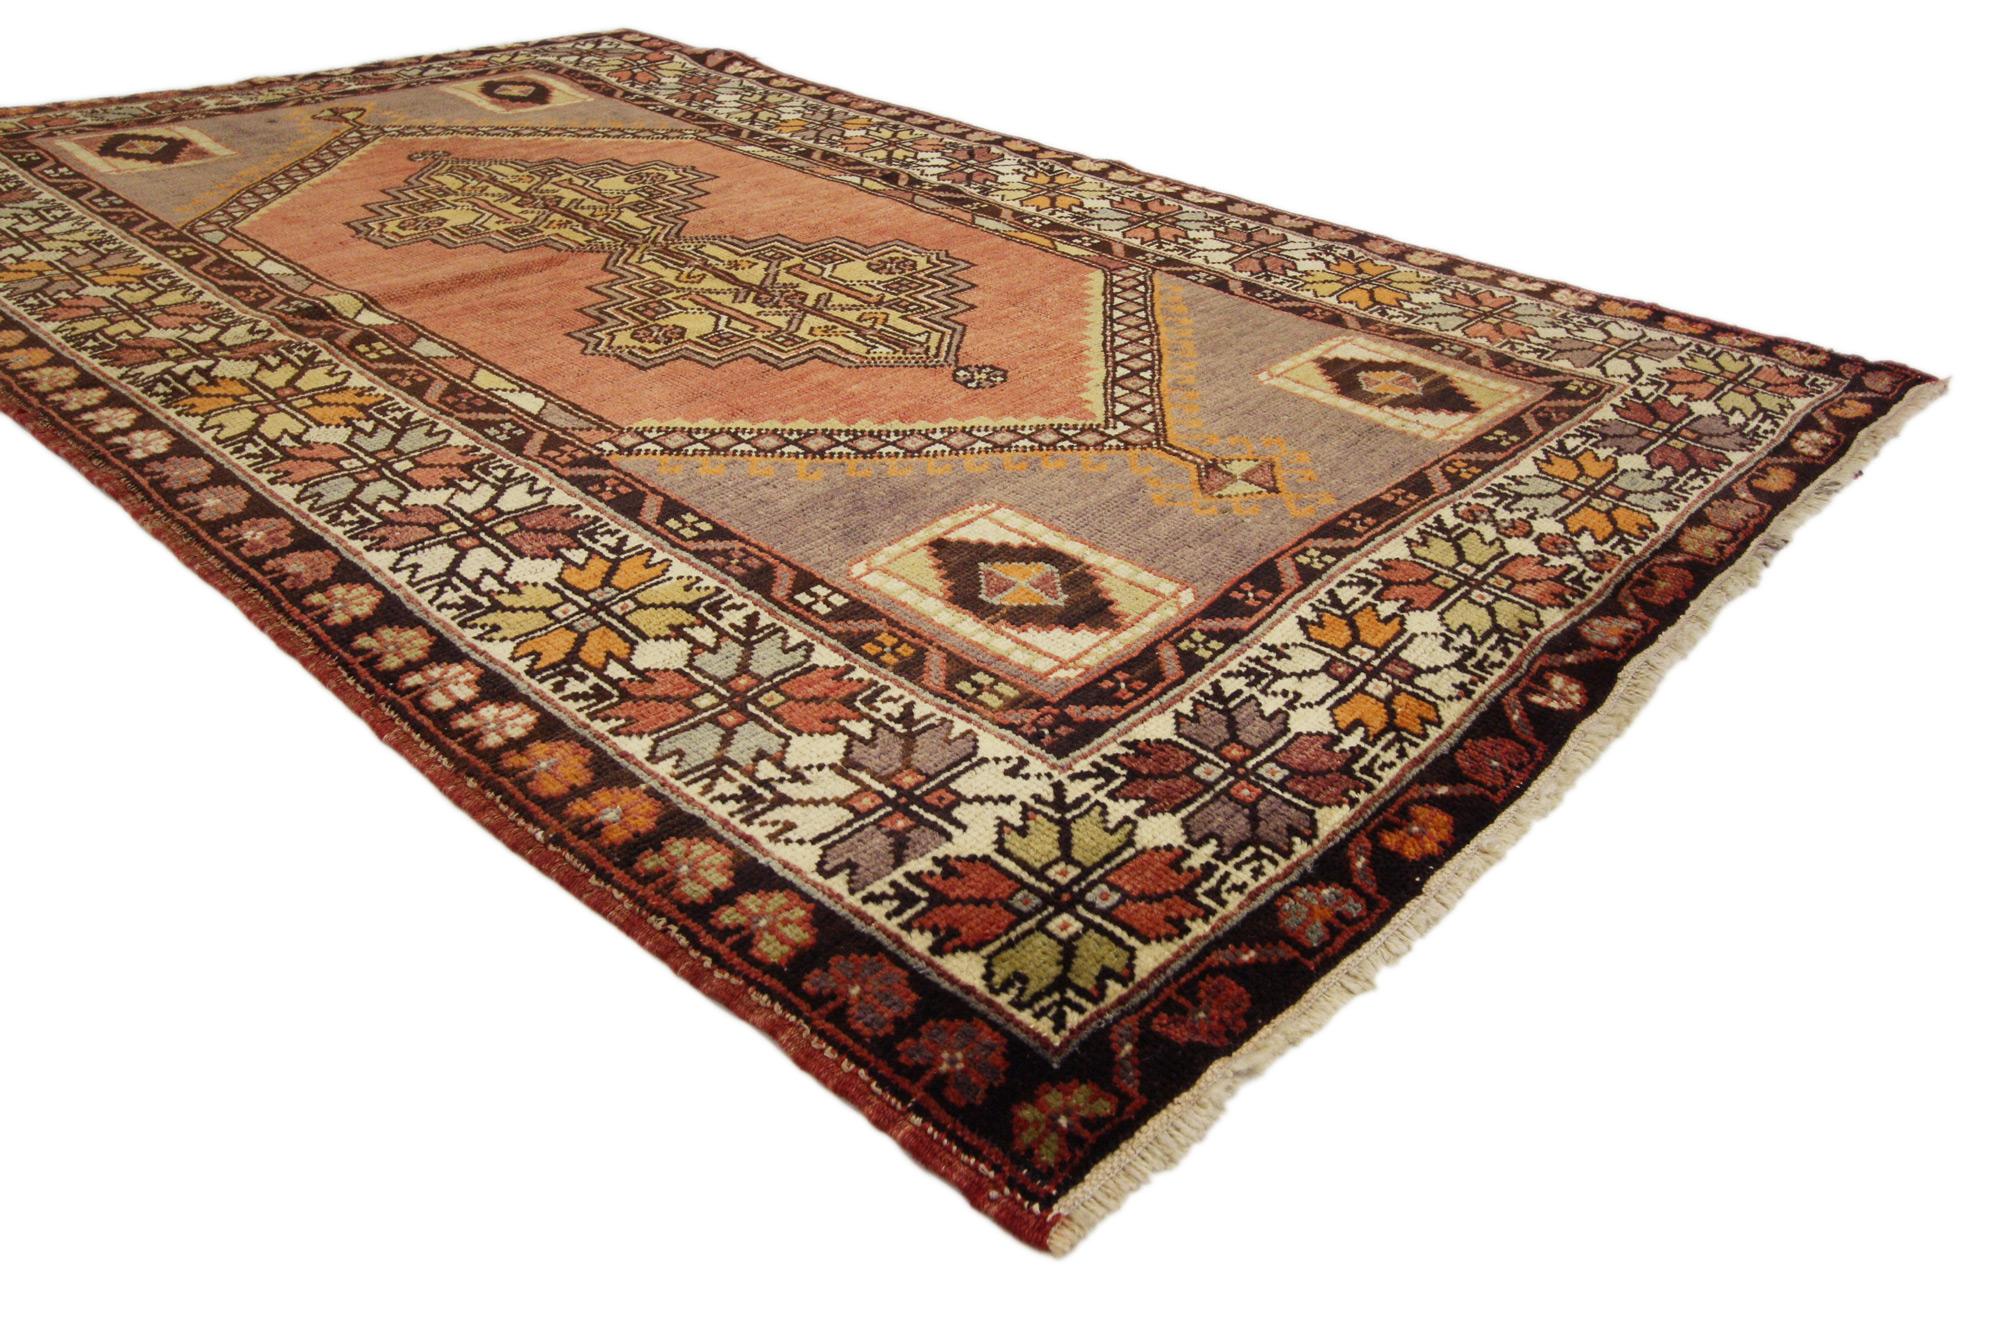 50155 Vintage Turkish Oushak Rug, 03'07 x 05'11. 
Modern style meets traditional sensibility in this hand knotted wool vintage Turkish Oushak Rug. The intricate geometric design and earthy colorway woven into this piece work together creating a